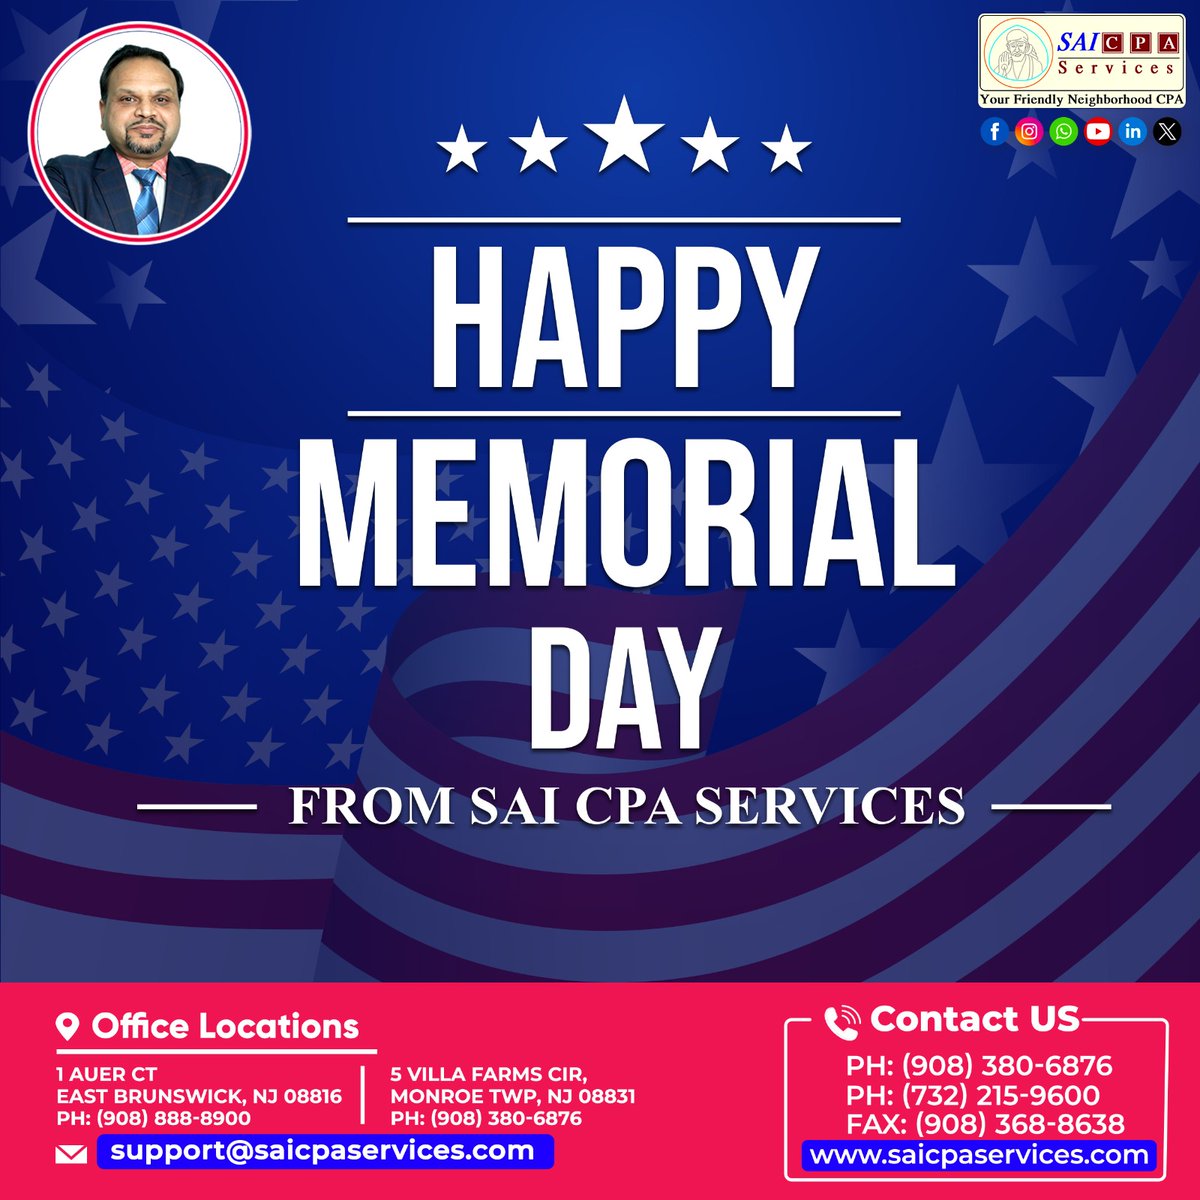 Honoring the brave men and women who have sacrificed for our freedom. This Memorial Day, we remember and salute their courage. - Sai CPA Services
Contact Us: saicpaservices.com
(908) 380-6876